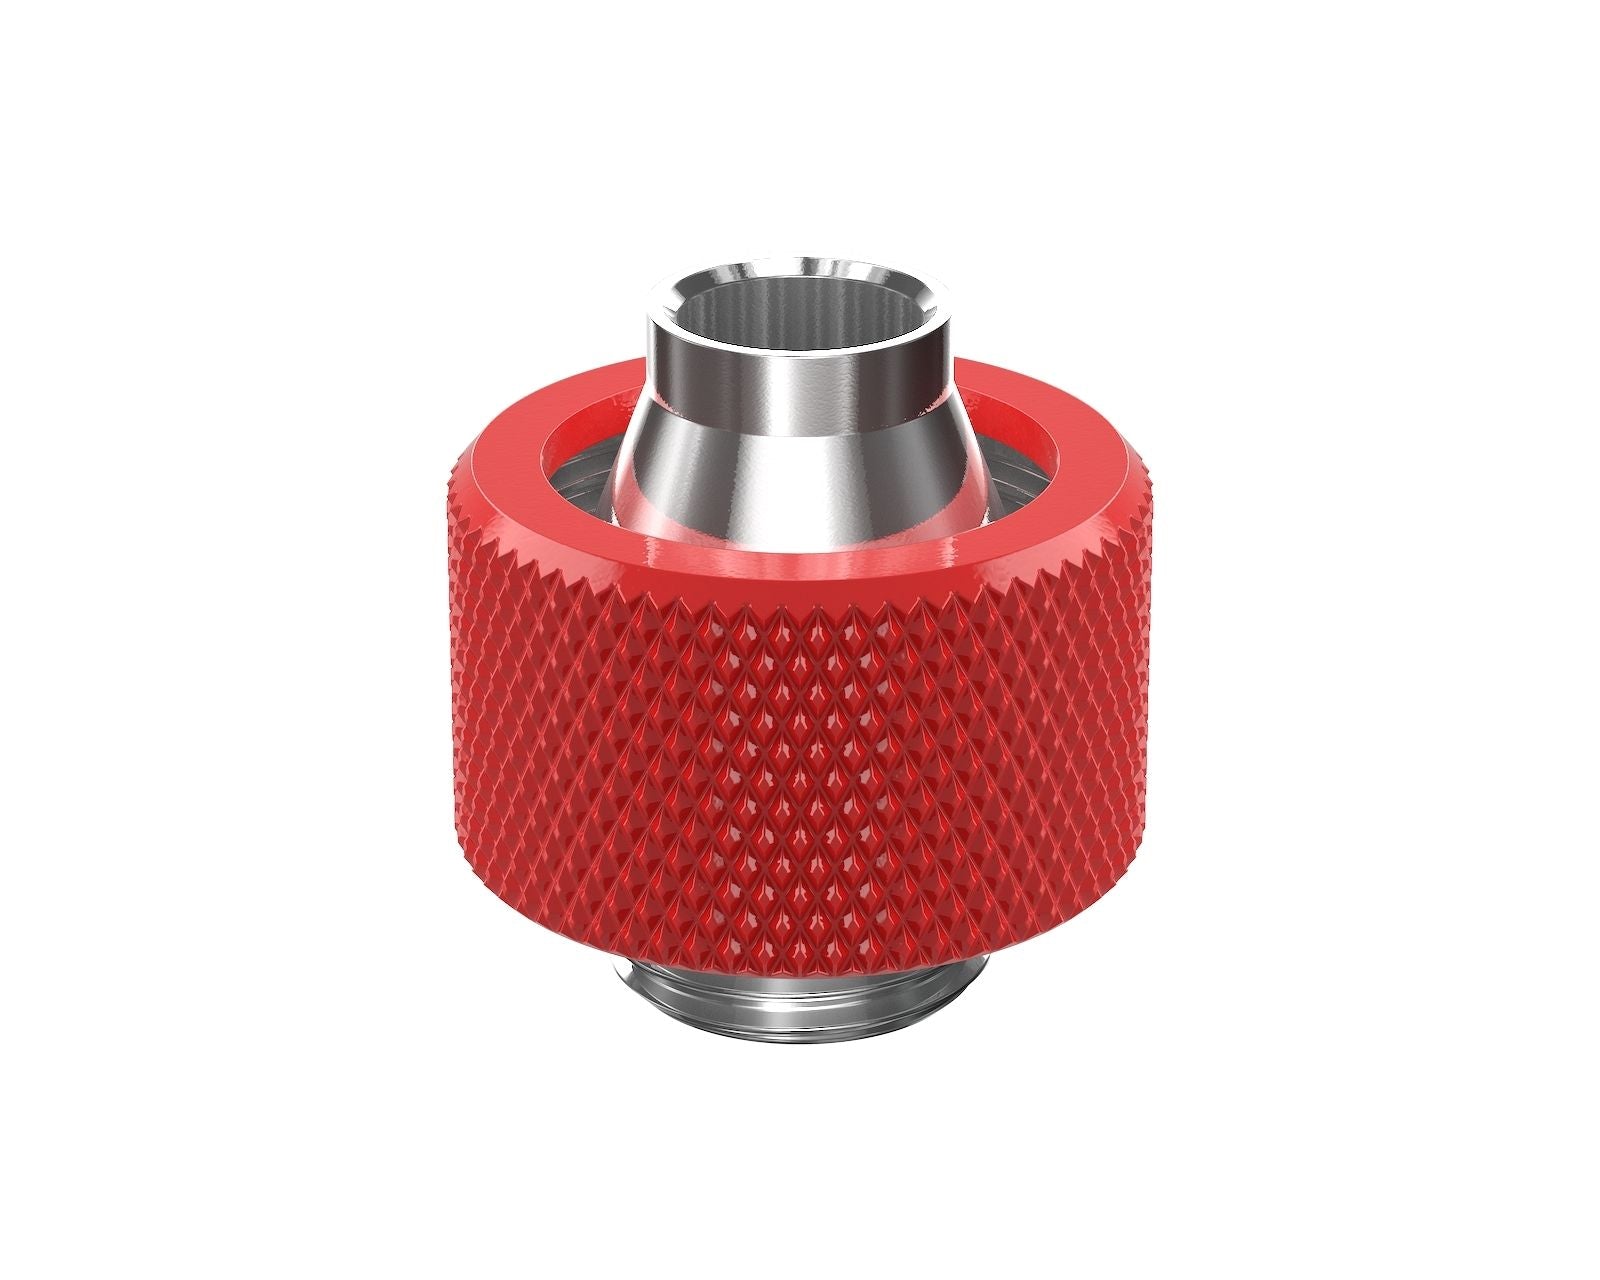 PrimoChill SecureFit SX - Premium Compression Fitting For 7/16in ID x 5/8in OD Flexible Tubing (F-SFSX758) - Available in 20+ Colors, Custom Watercooling Loop Ready - Razor Red